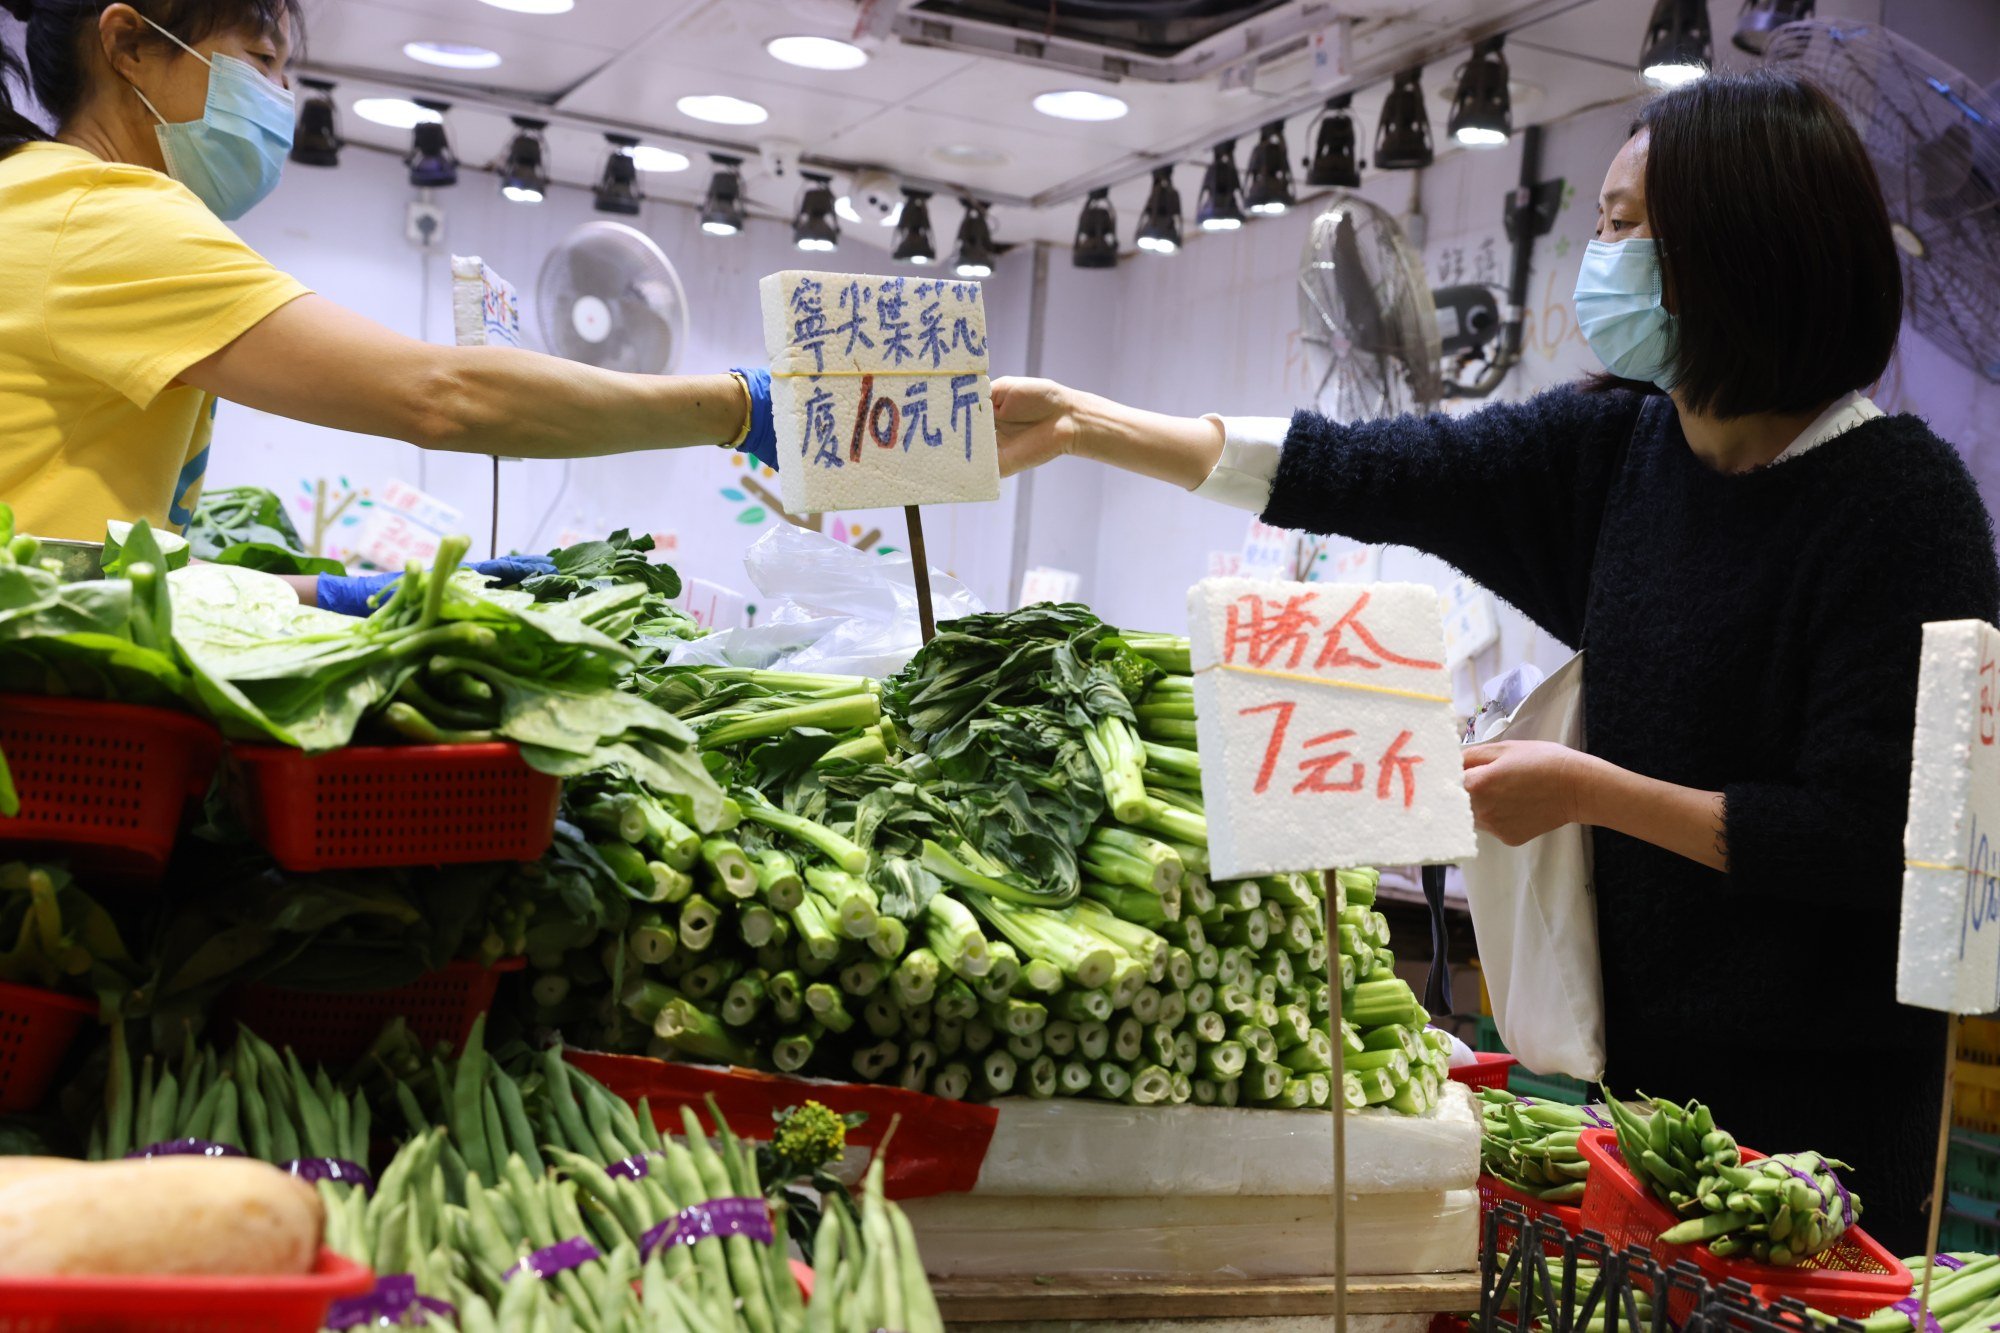 Housewife May Liu (right) at the wet market in Sham Shui Po. Hongkongers are feeling the pinch of higher prices from inflation. Photo: Nora Tam